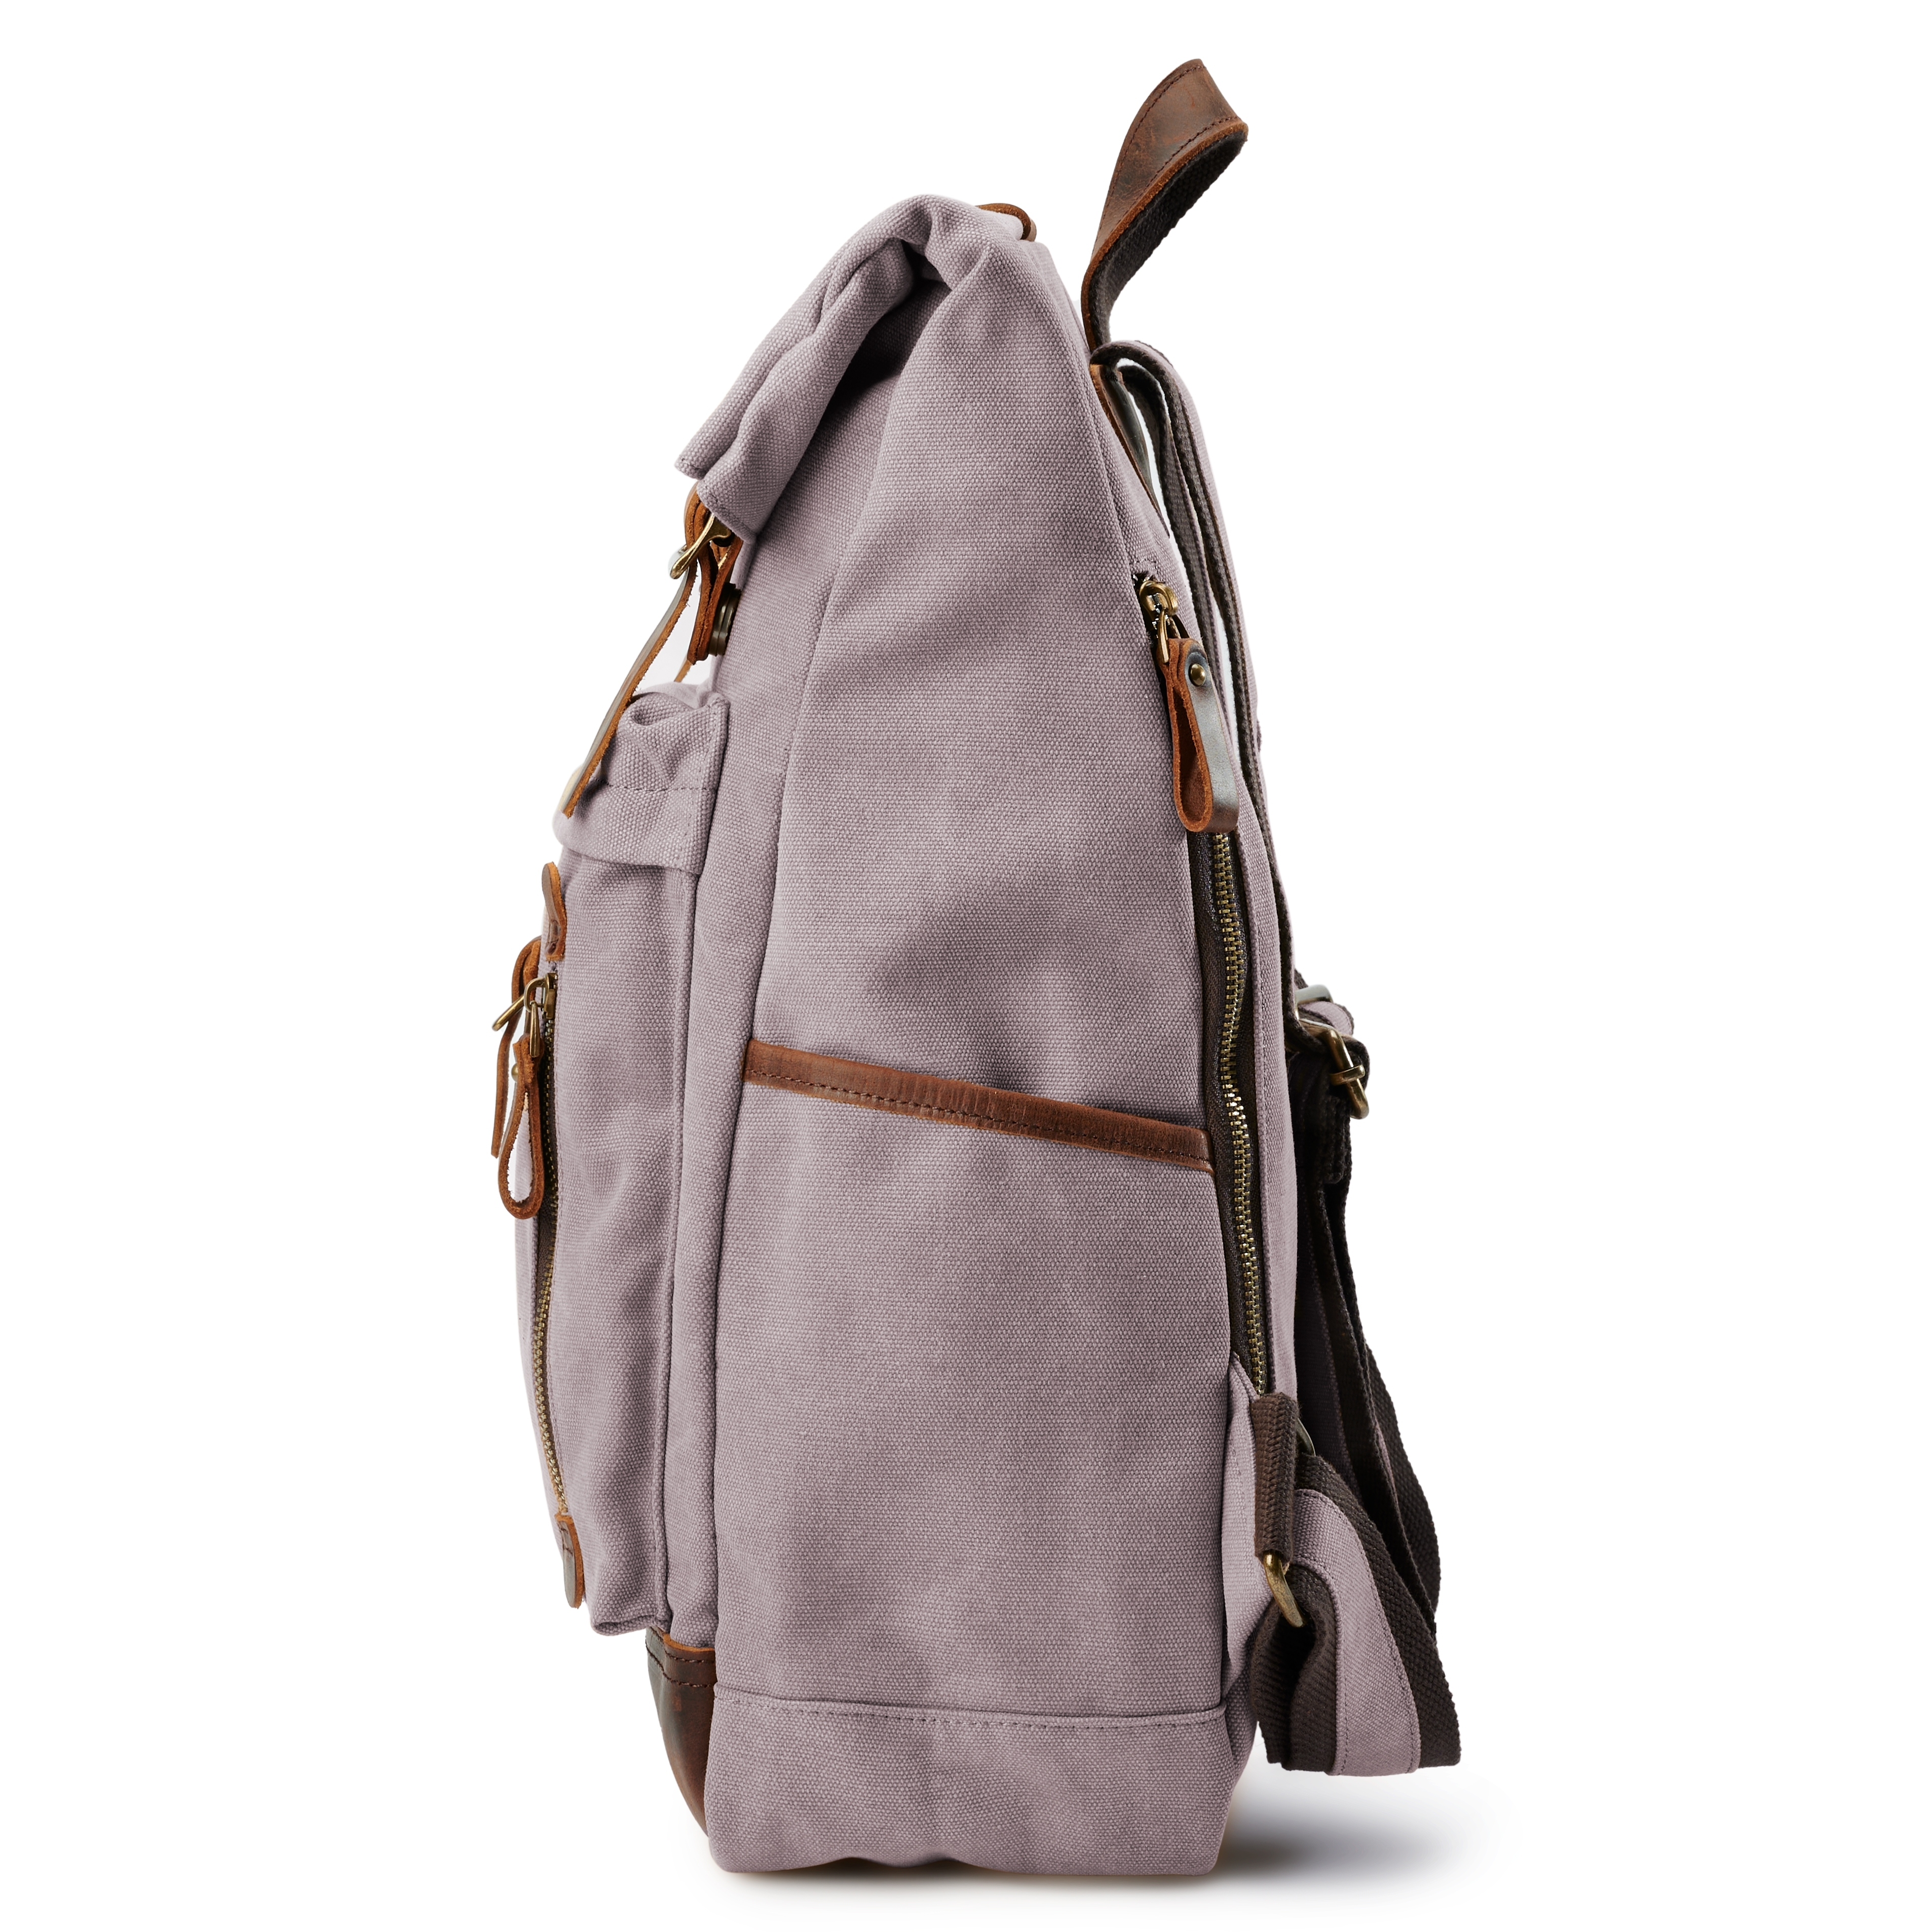 Rugged Vintage-Style Graphite Canvas & Leather Backpack - for Men - Delton Bags